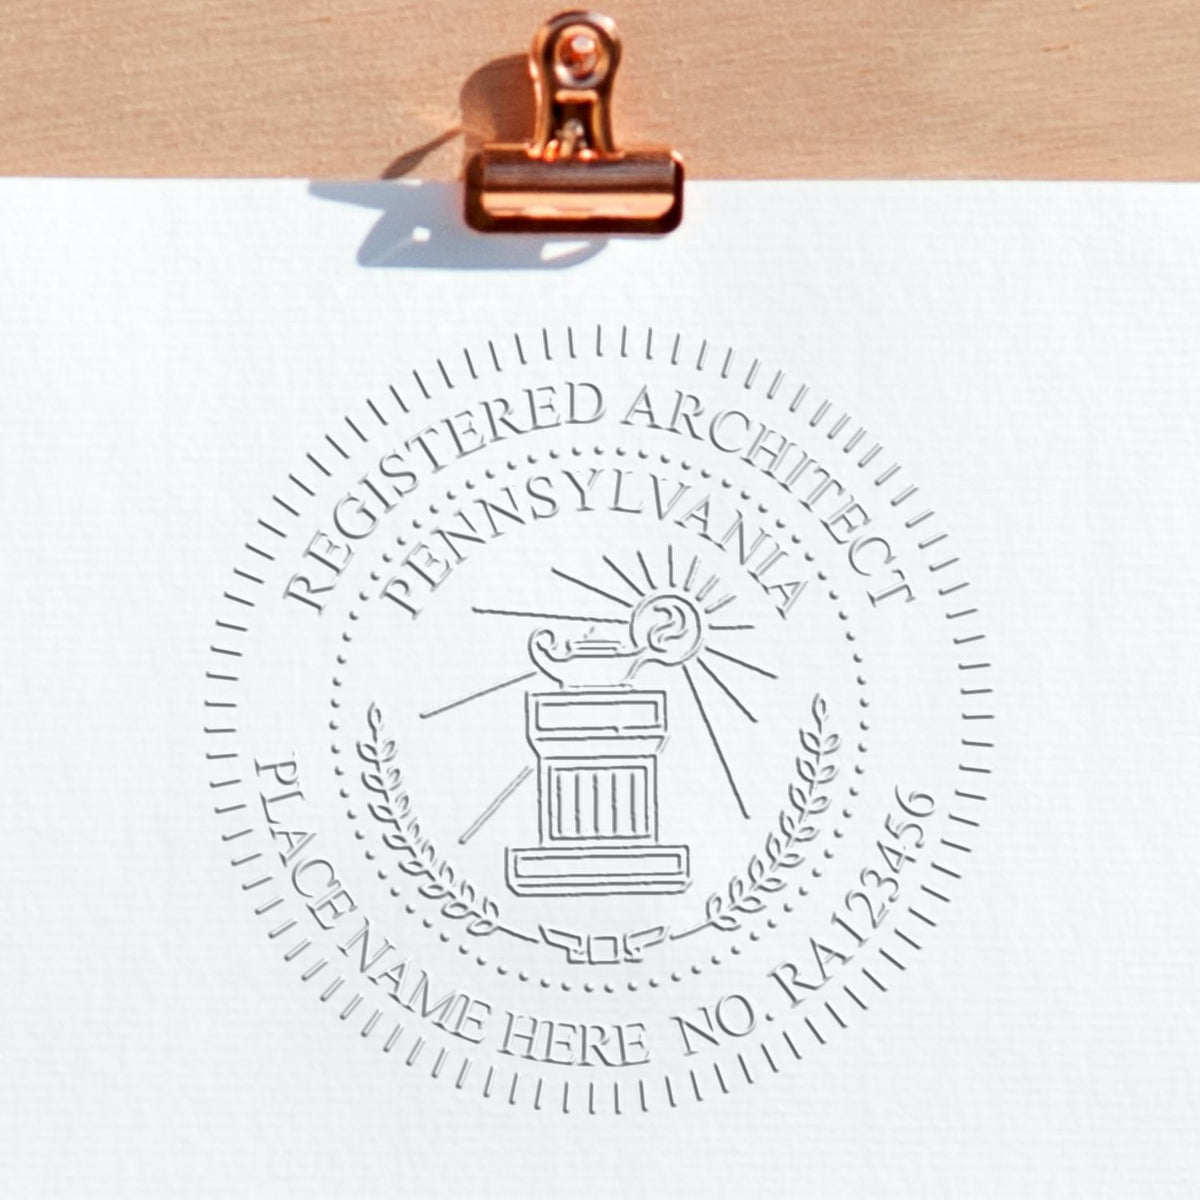 An alternative view of the State of Pennsylvania Long Reach Architectural Embossing Seal stamped on a sheet of paper showing the image in use